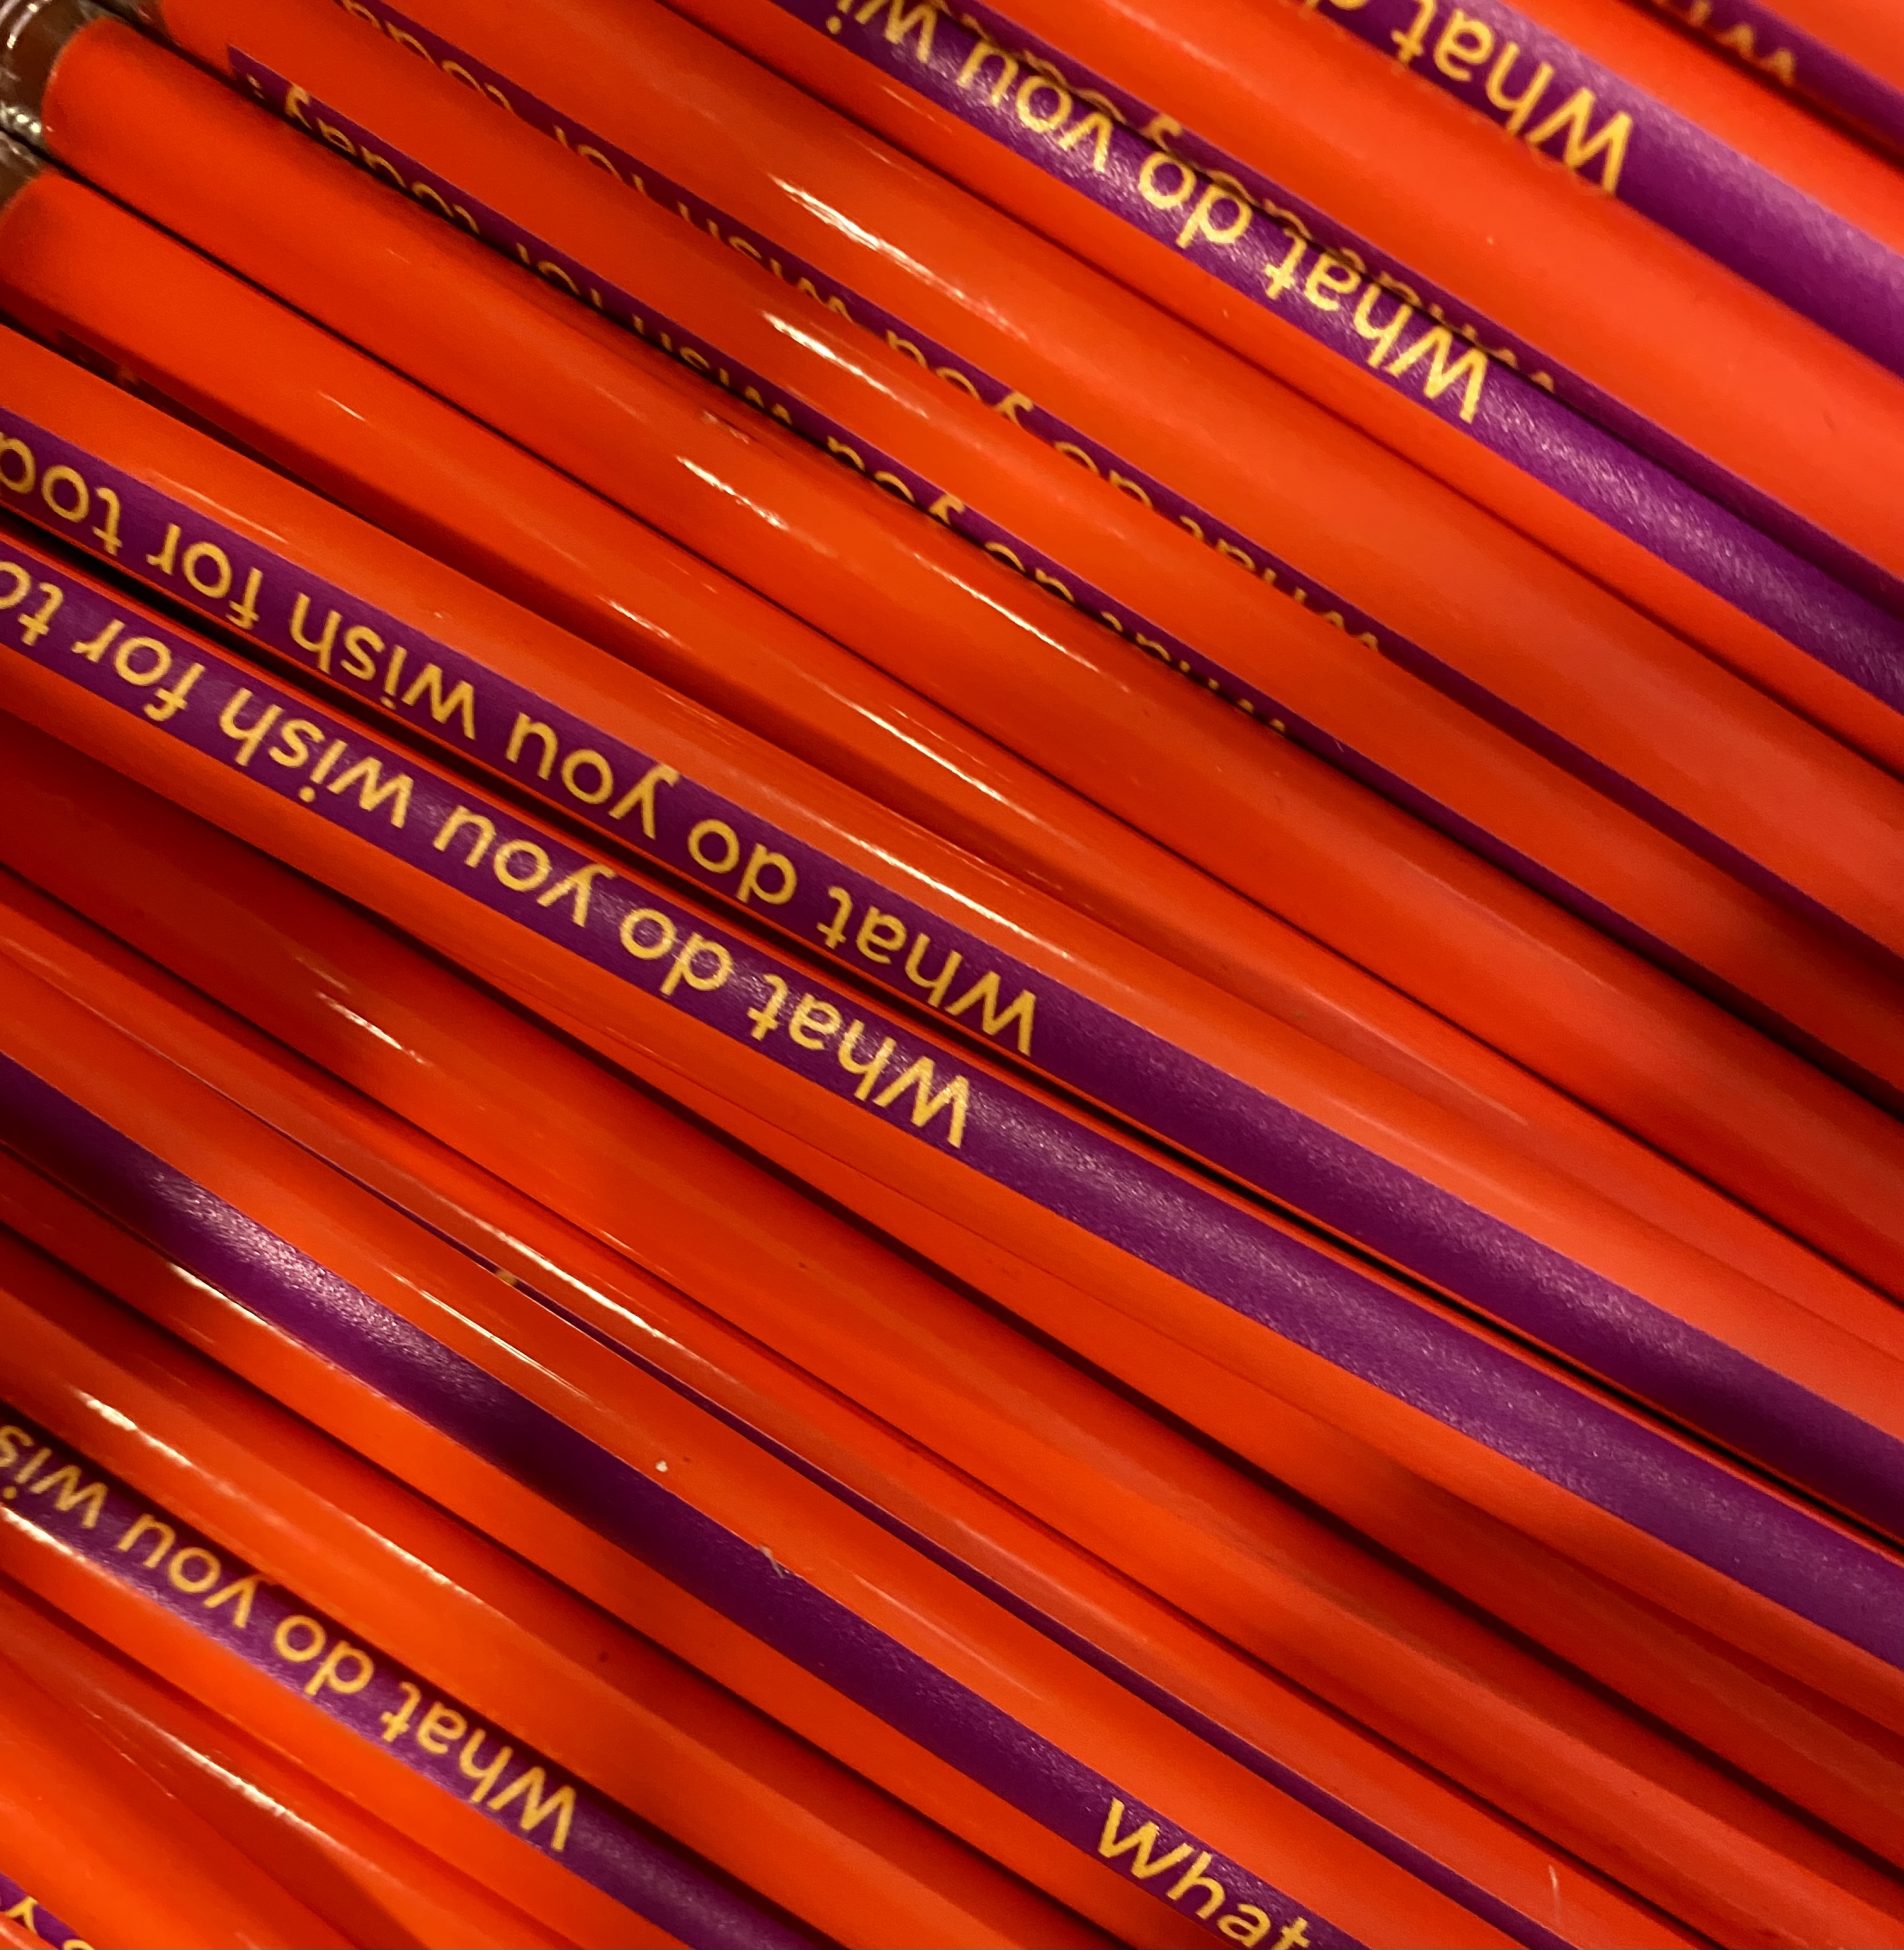 A close up photo of a box of orange pencils. Each pencil has a purple stripe along it with the text 